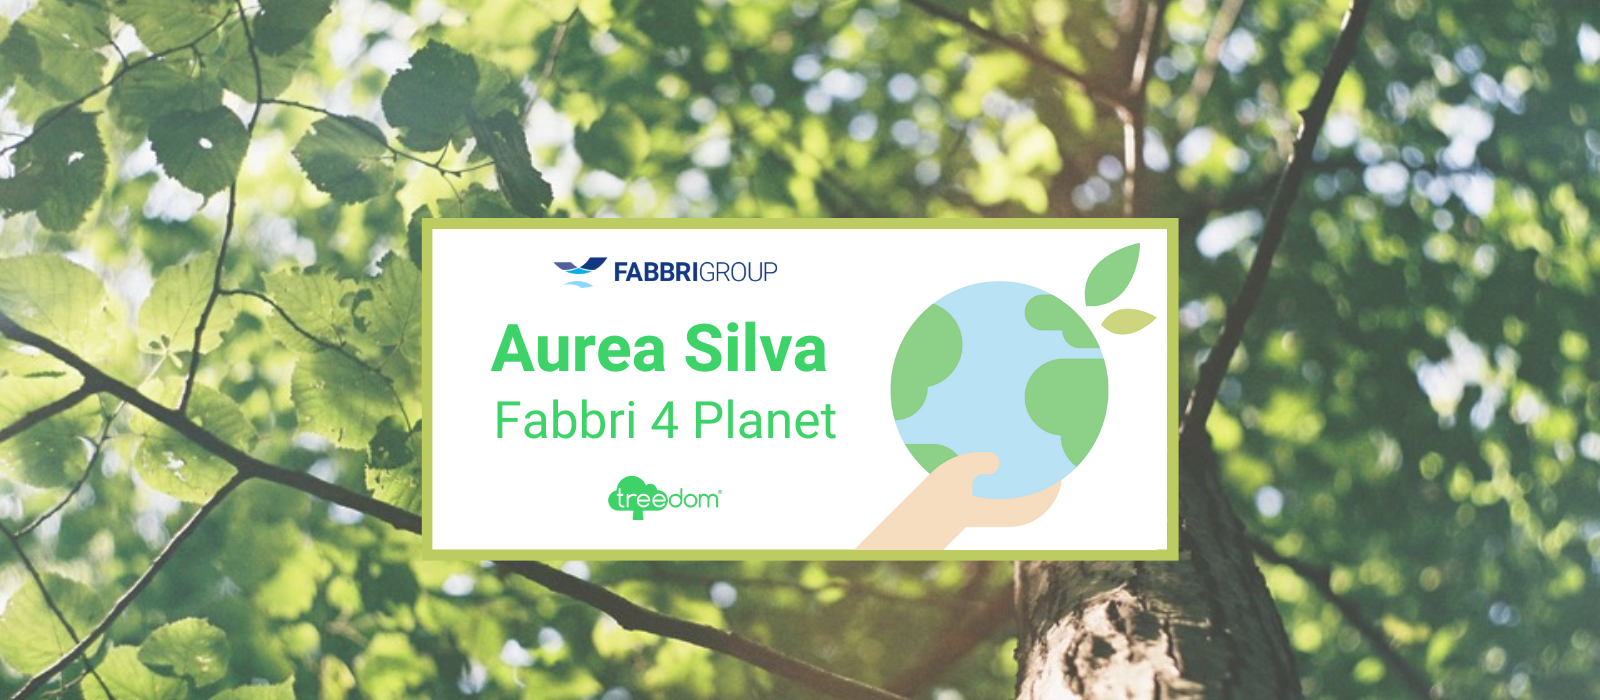 Fabbri & the International Day of Forests (21 March)